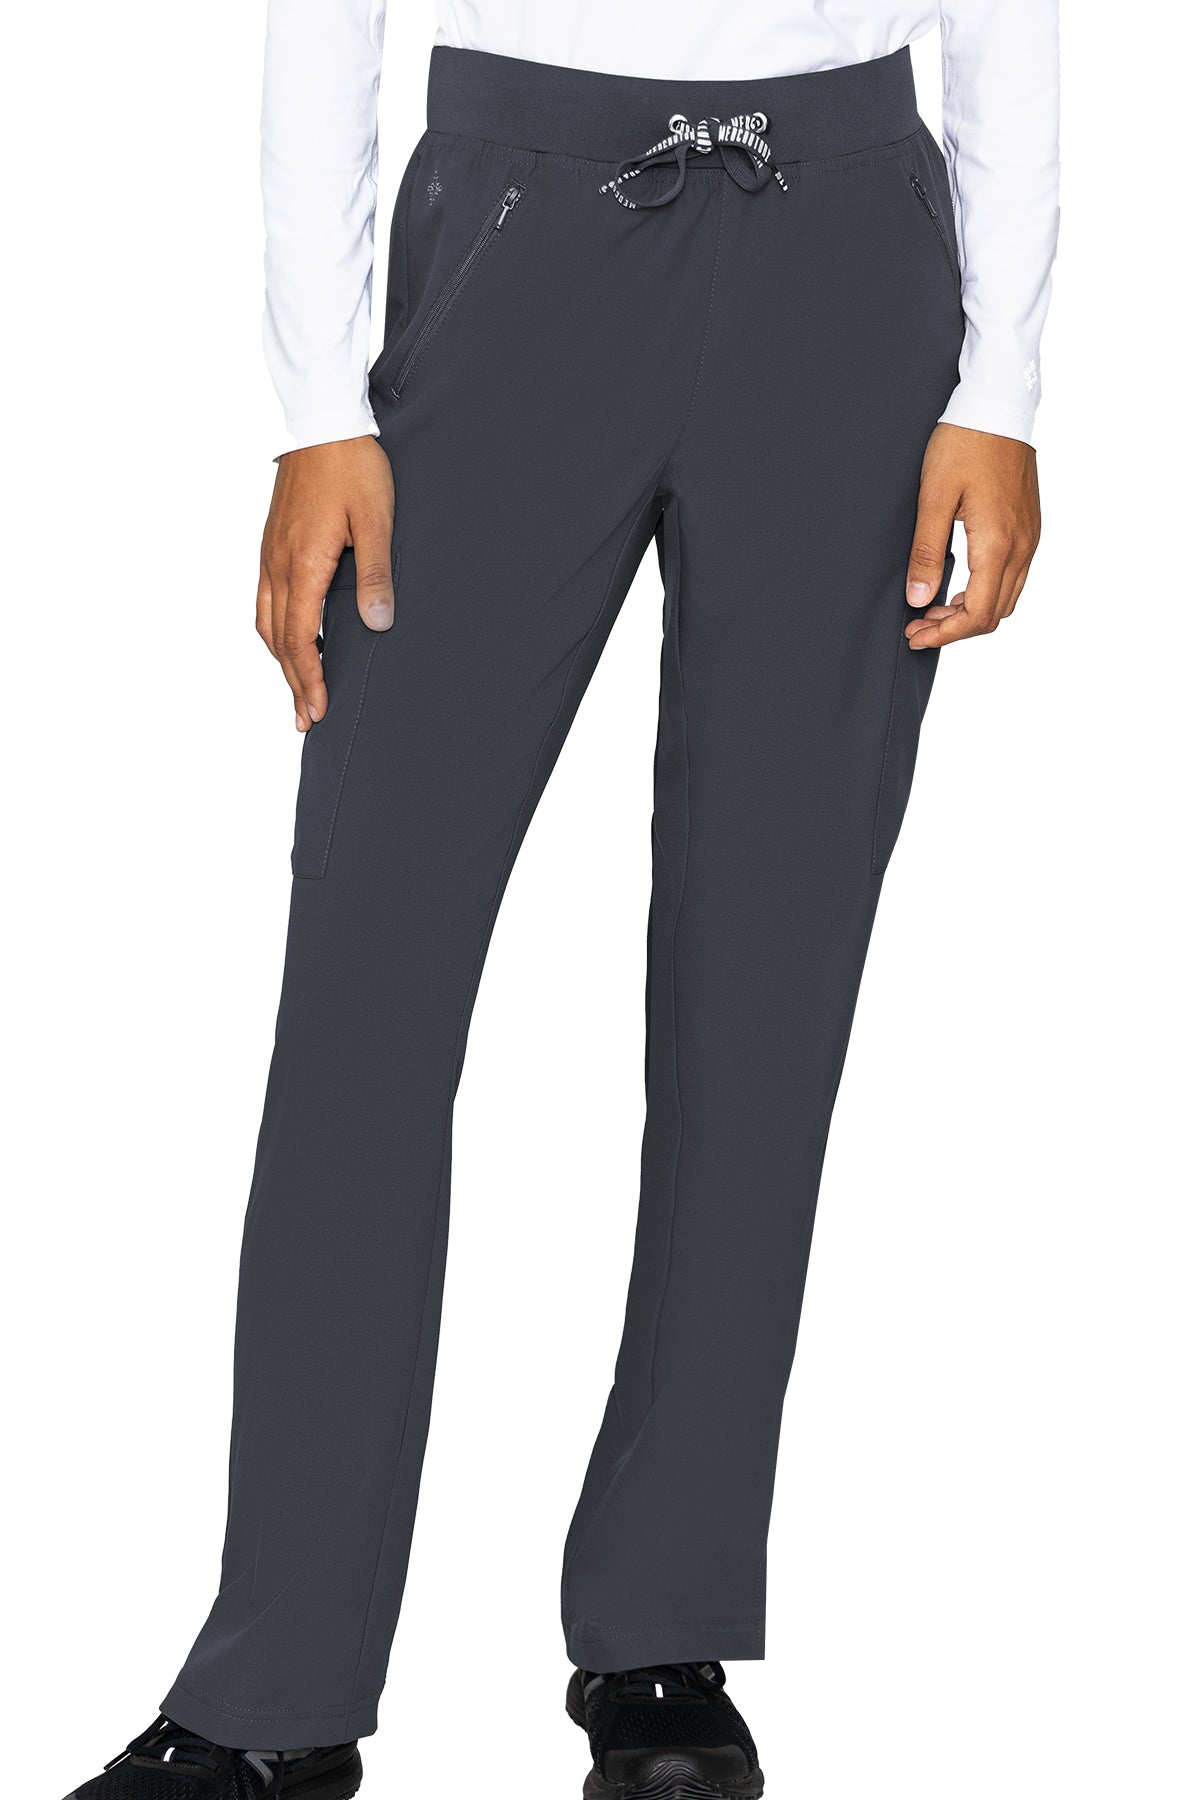 Med Couture Petite Scrub Pants Insight Zipper Pocket Pant in Pewter at Parker's Clothing and Shoes